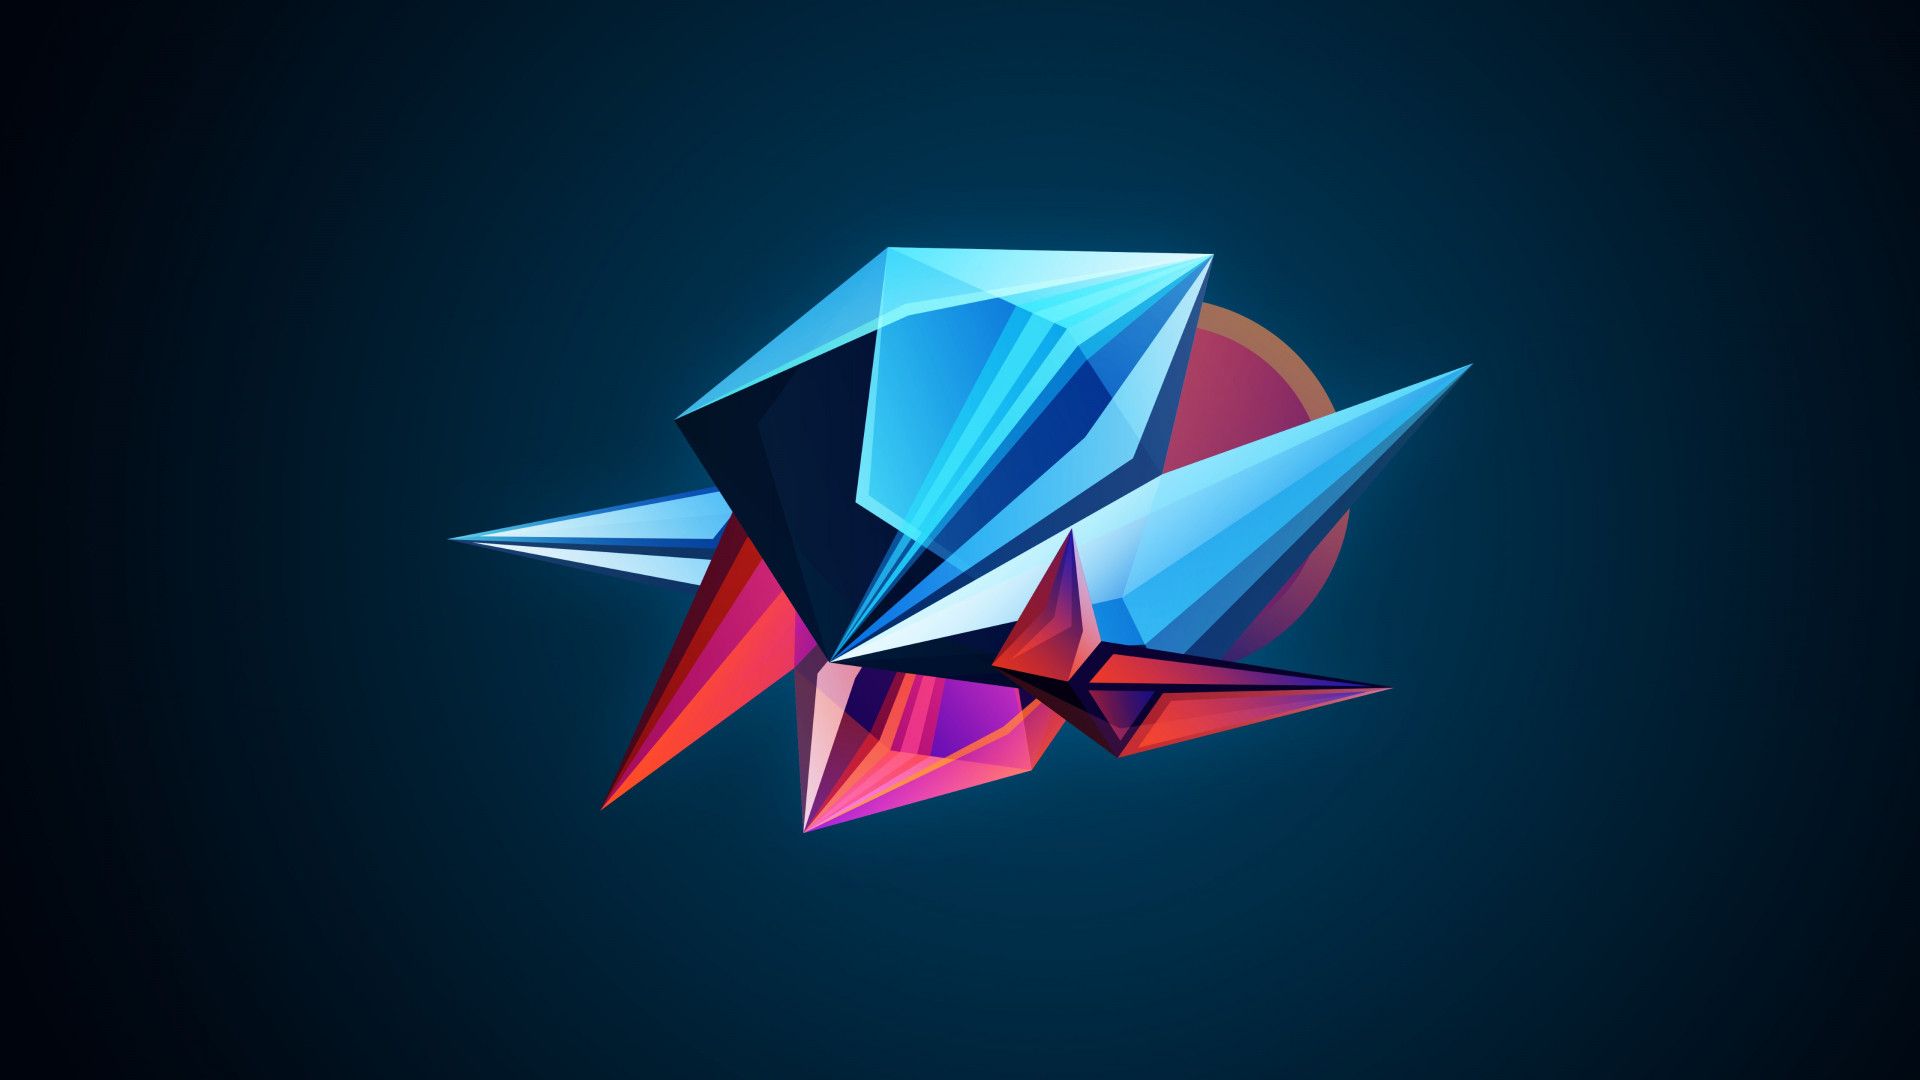 Download wallpaper: Abstract 3D shapes 1920x1080